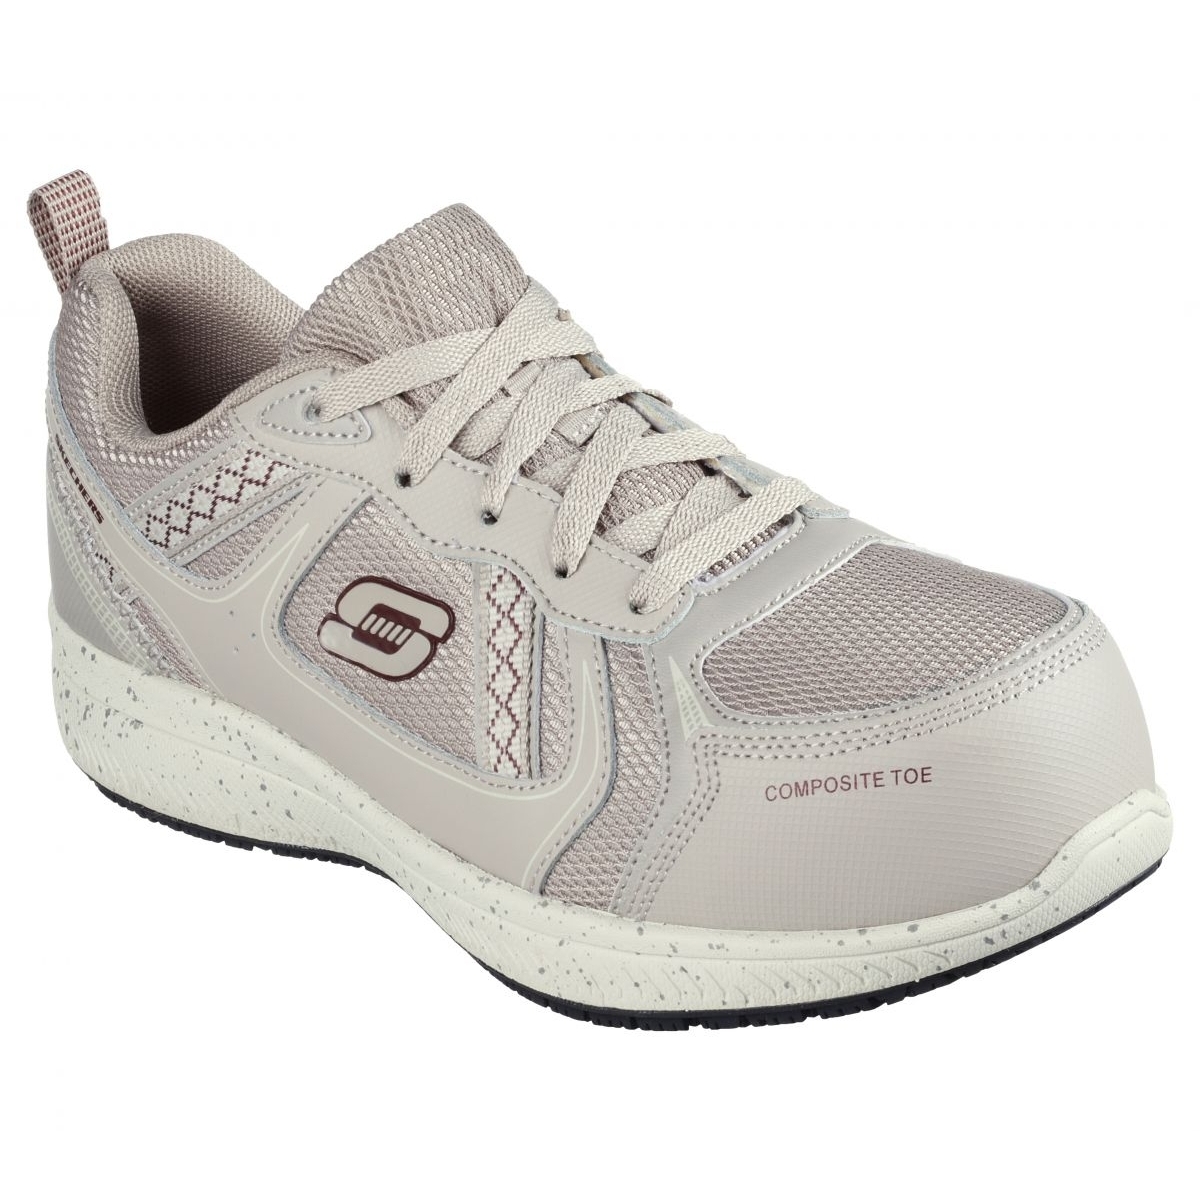 Skechers ELG-5 - Composite Toe TAUPE - TAUPE, 8